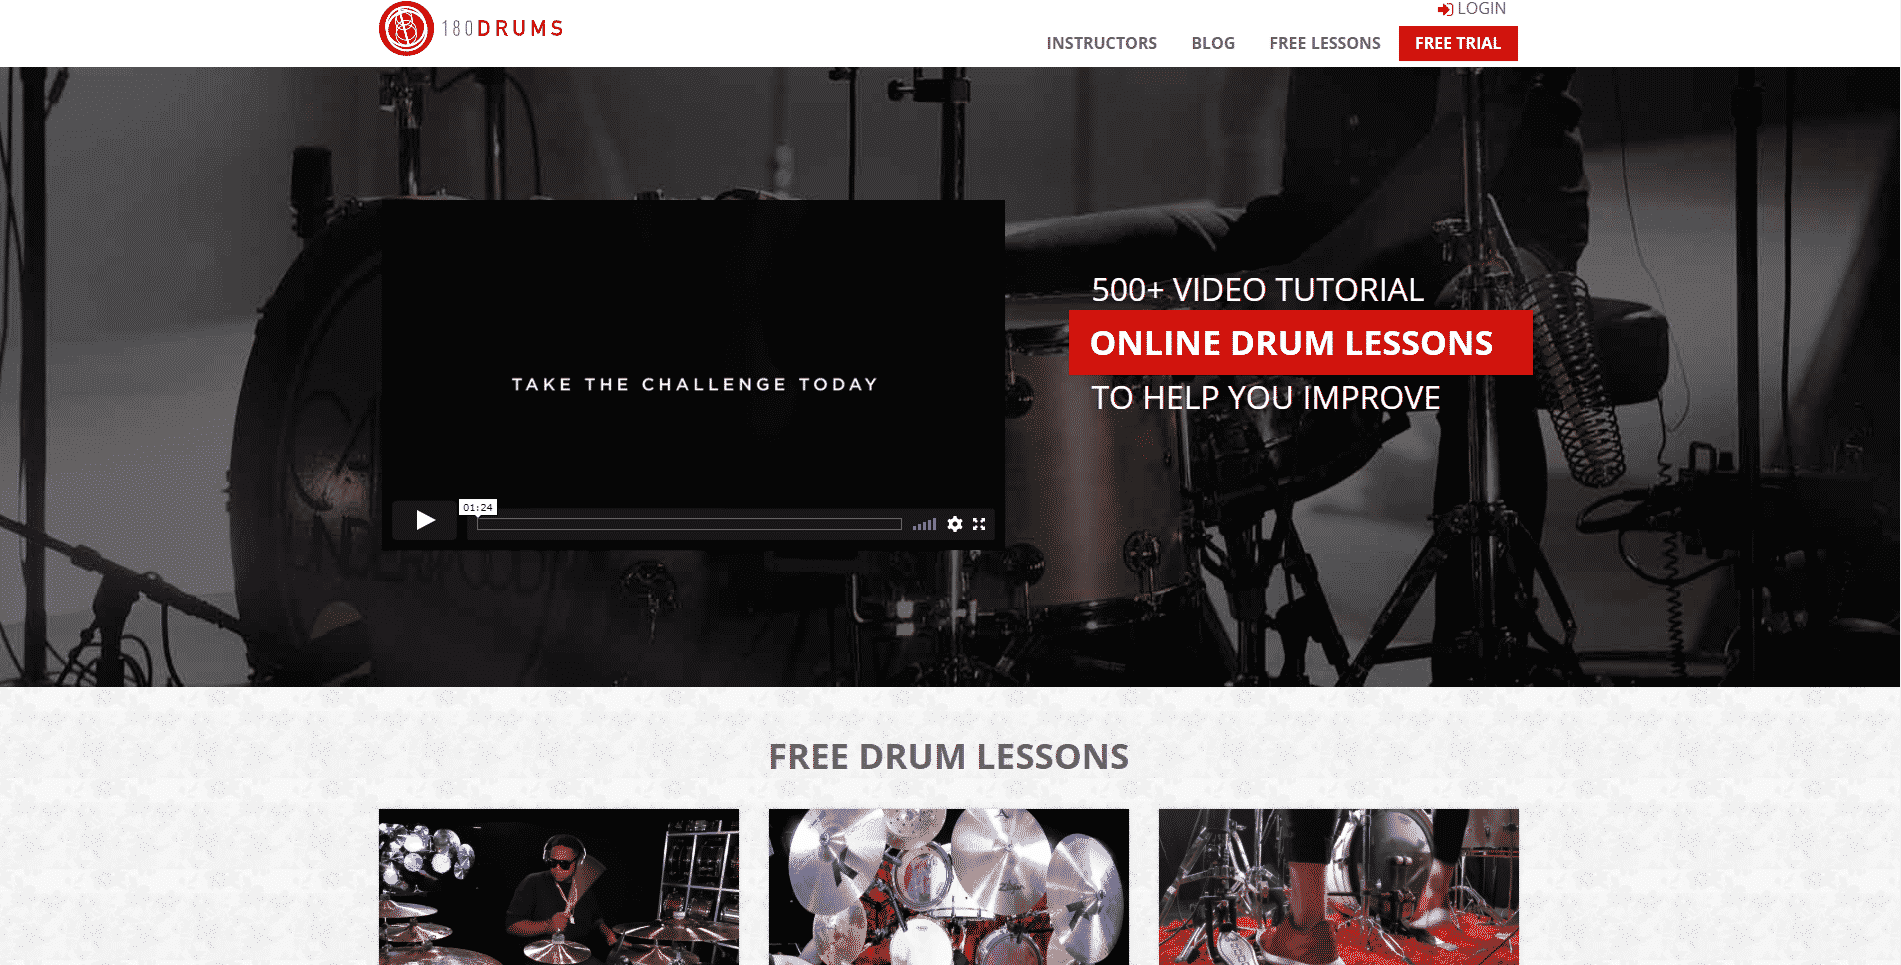 180 Drums Drum Lessons for Intermediate Online